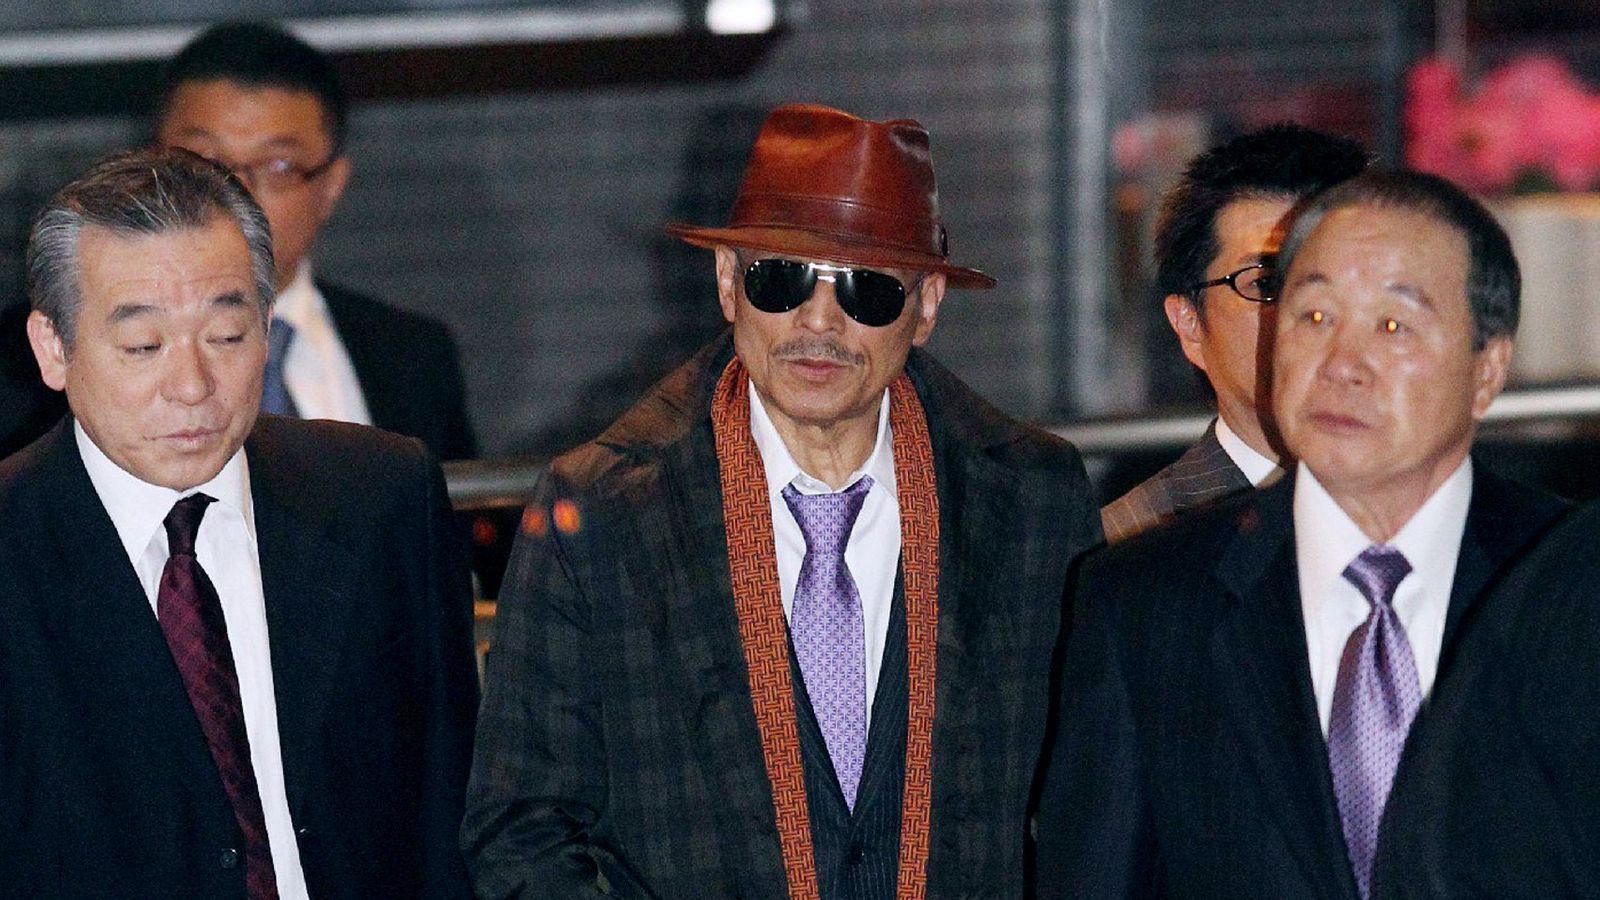 Johnny Depp in his new film role as a Yakuza Boss..